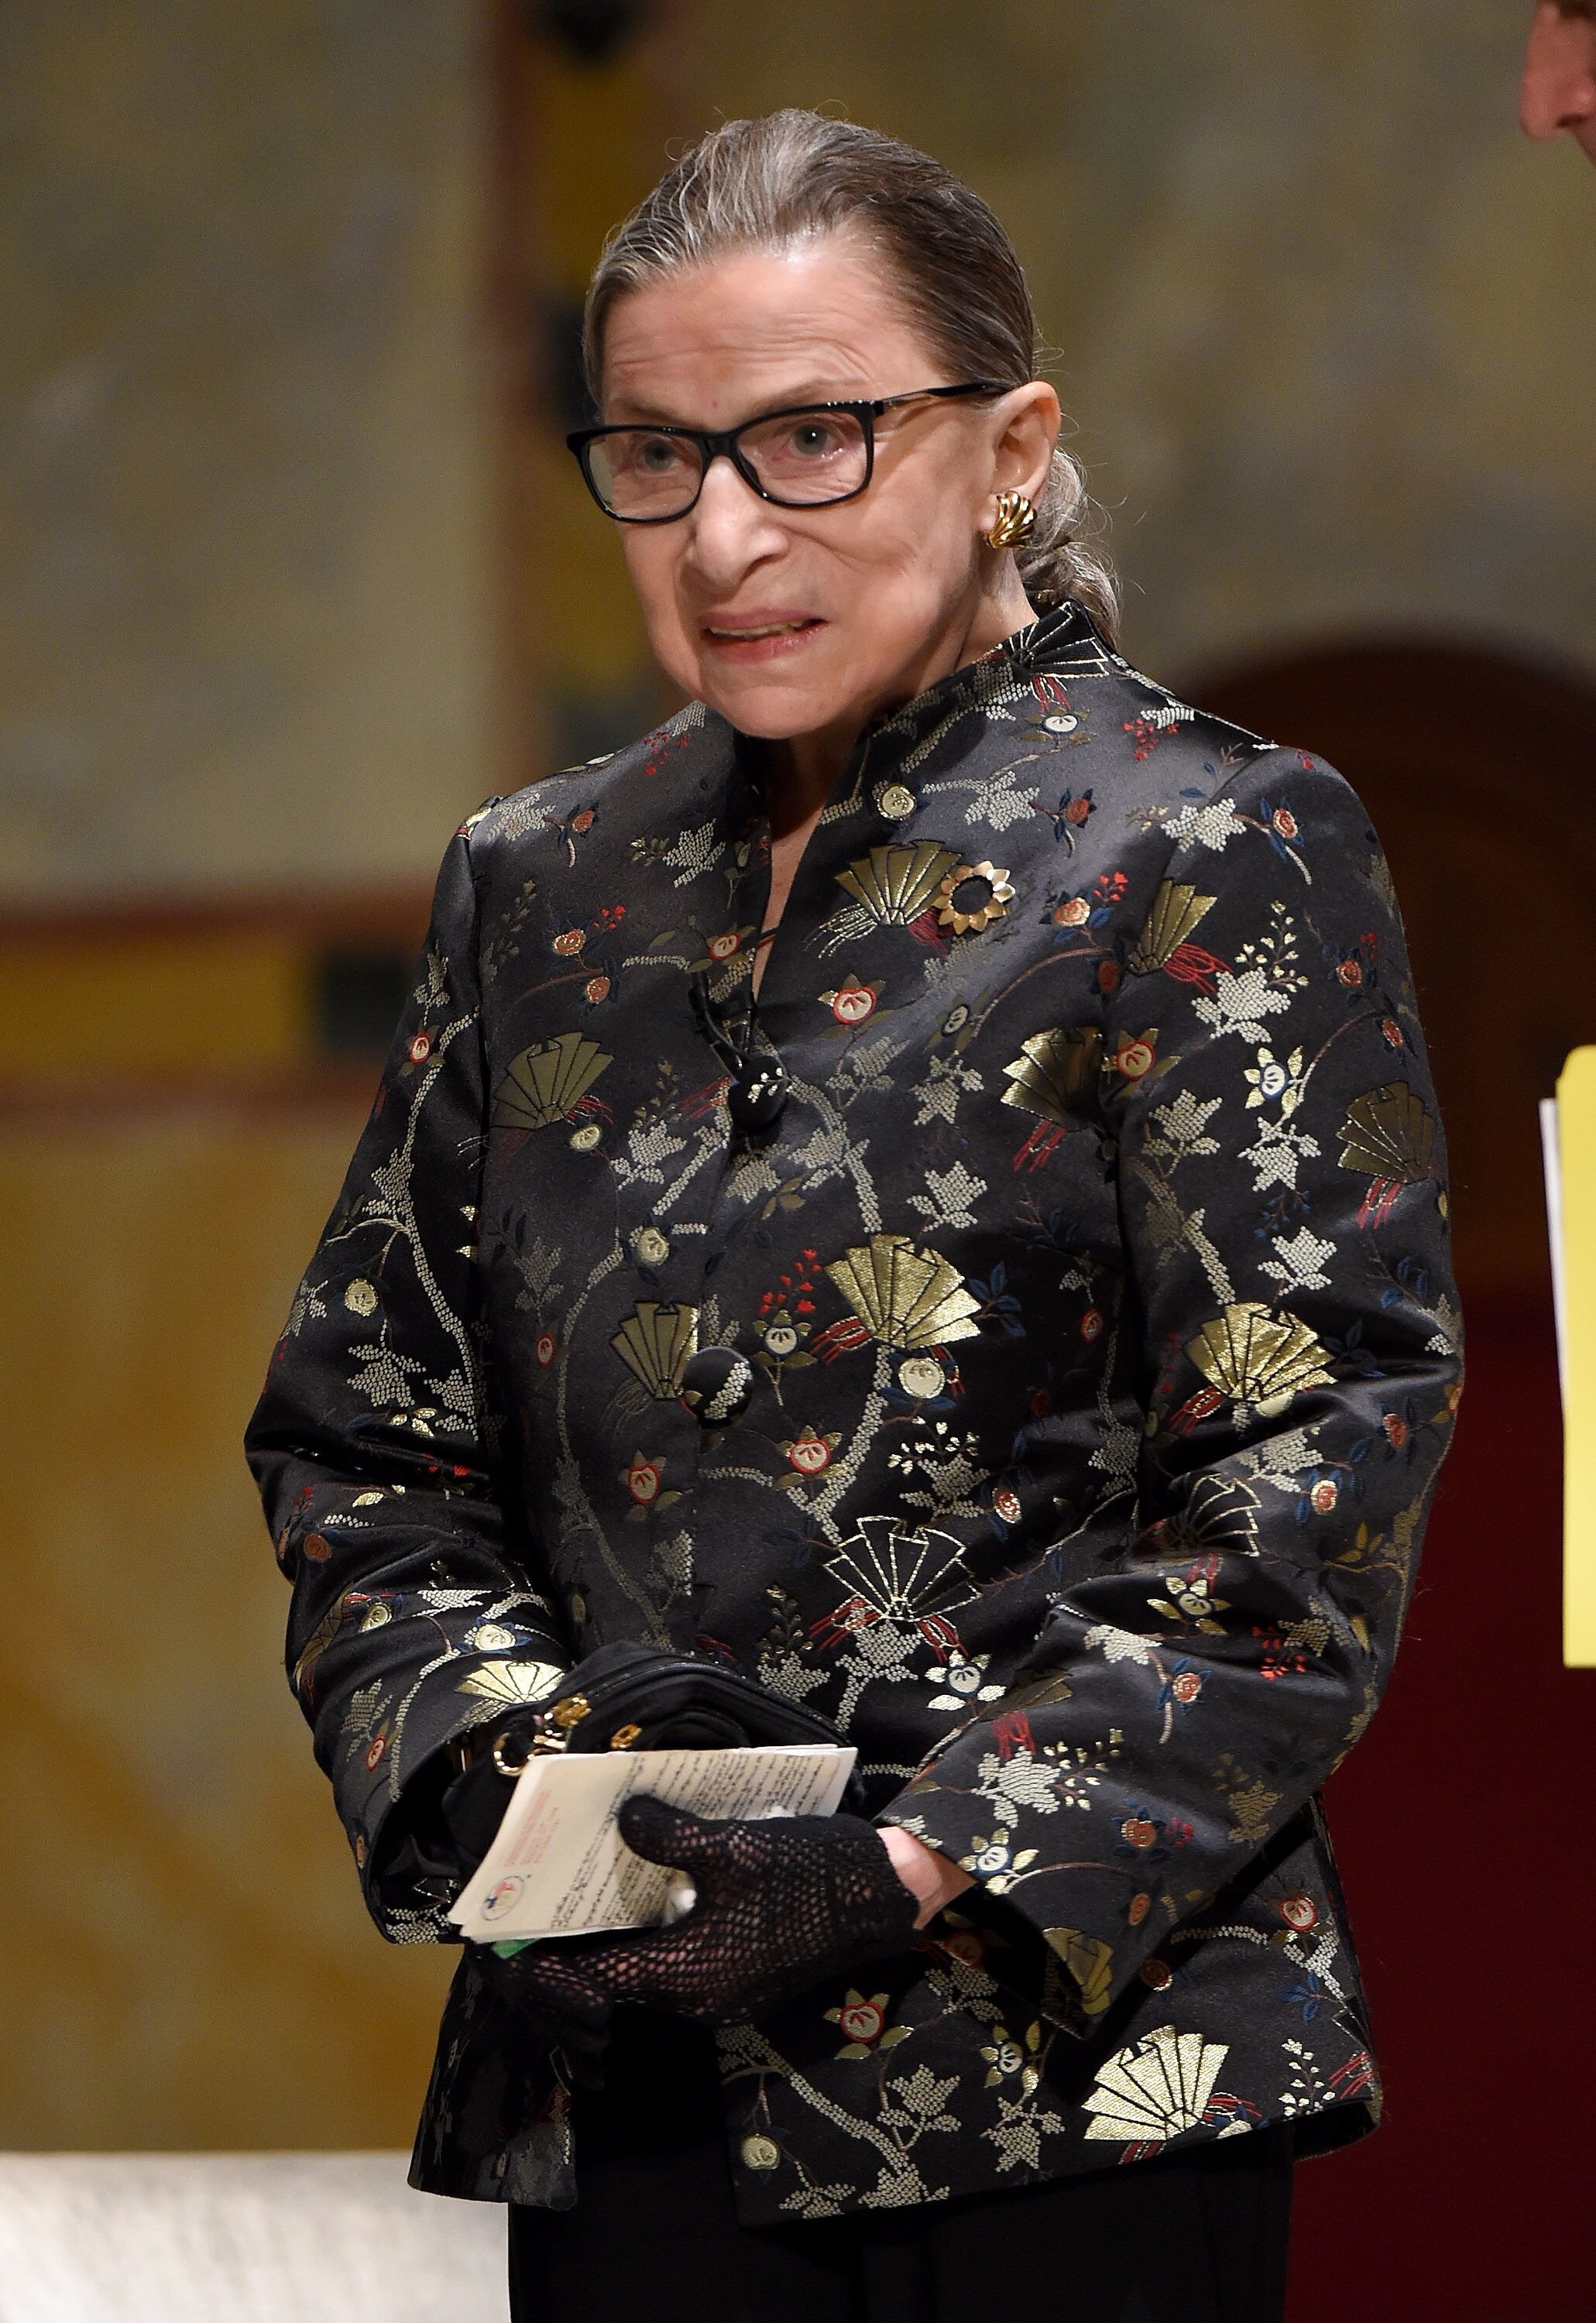 Supreme Court Justice Ruth Bader Ginsburg at An Historic Evening in her honor on September 21, 2016. | Photo: Getty Images